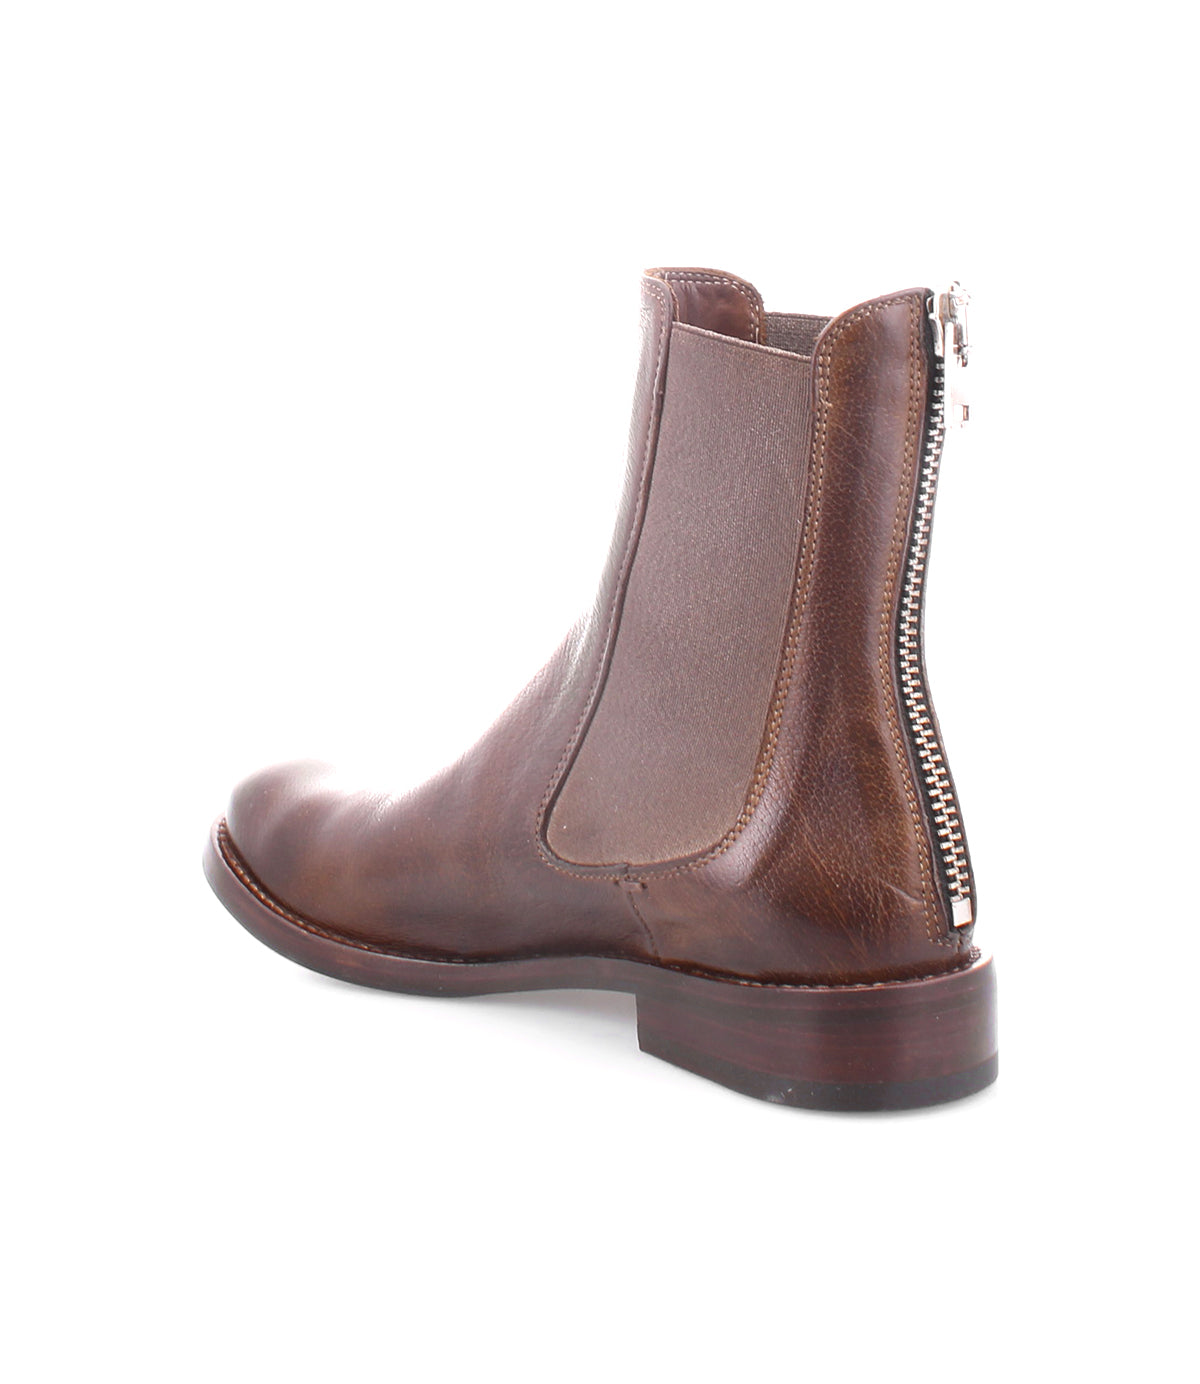 An Italian leather Barfly Chelsea boot with a back-zip by Bed Stu.